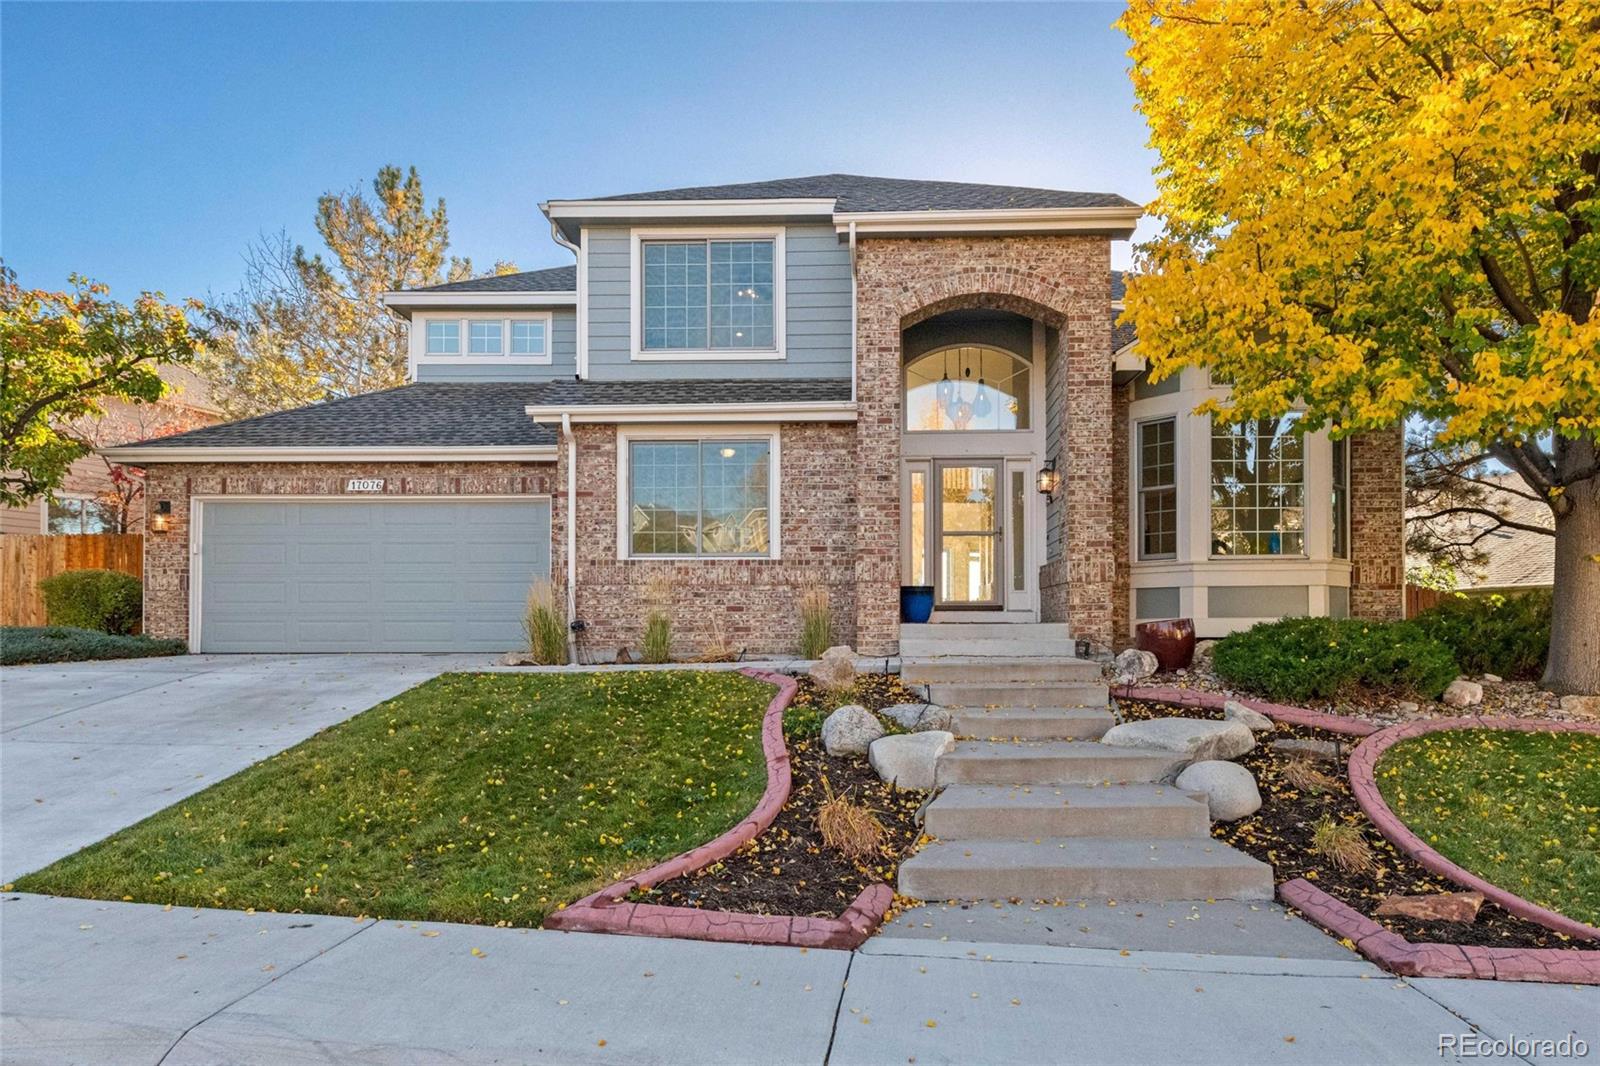 17076 W 71st Place, arvada MLS: 8142432 Beds: 4 Baths: 4 Price: $1,300,000